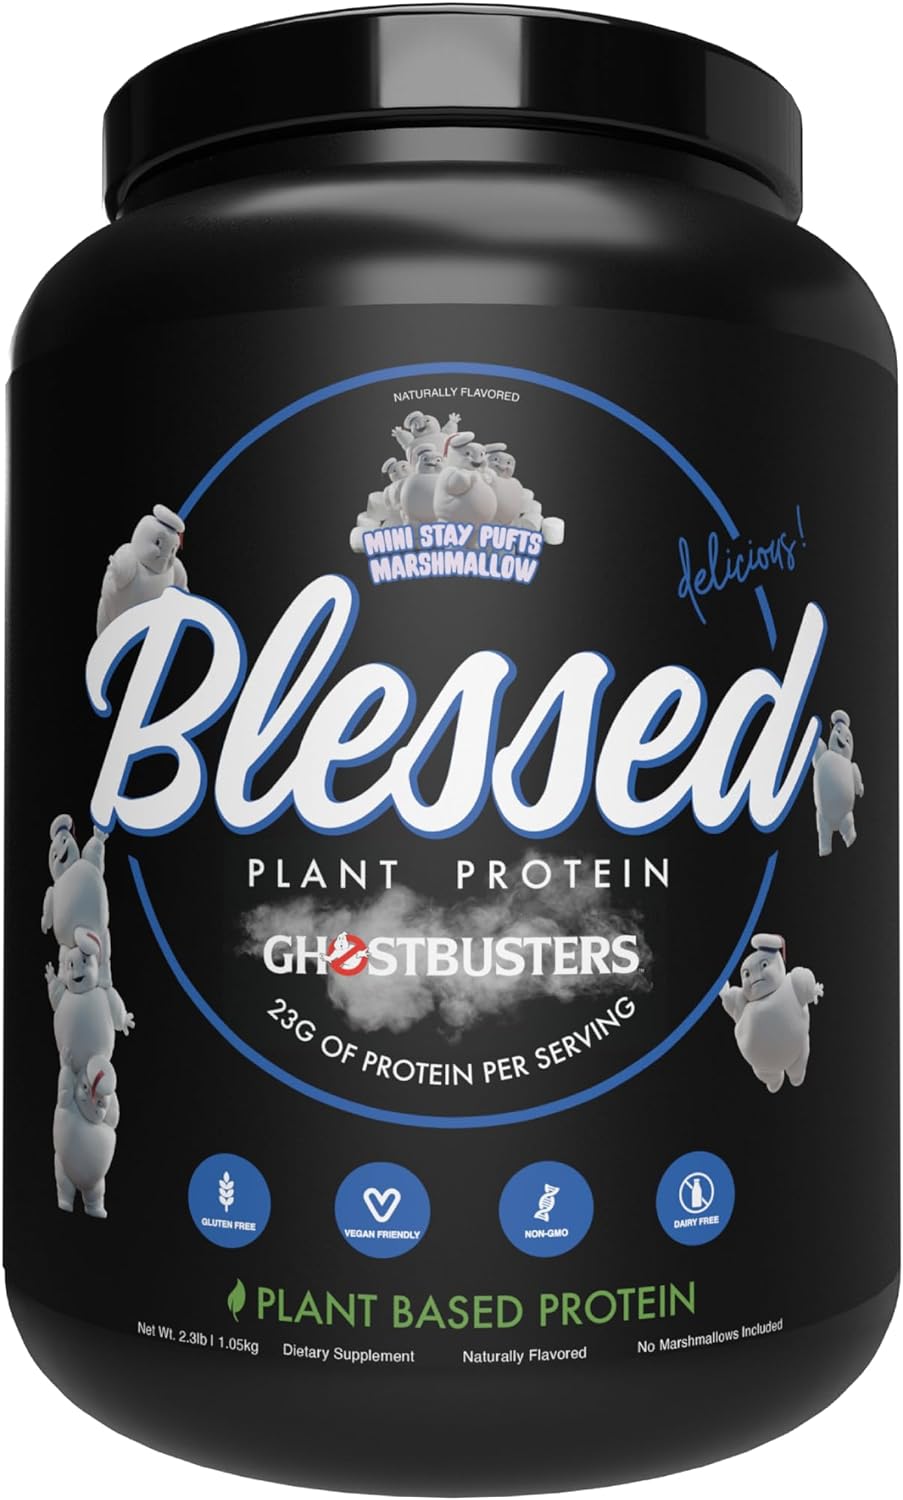 BLESSED x Ghostbusters Vegan Protein Powder - Plant Based Protein Shak